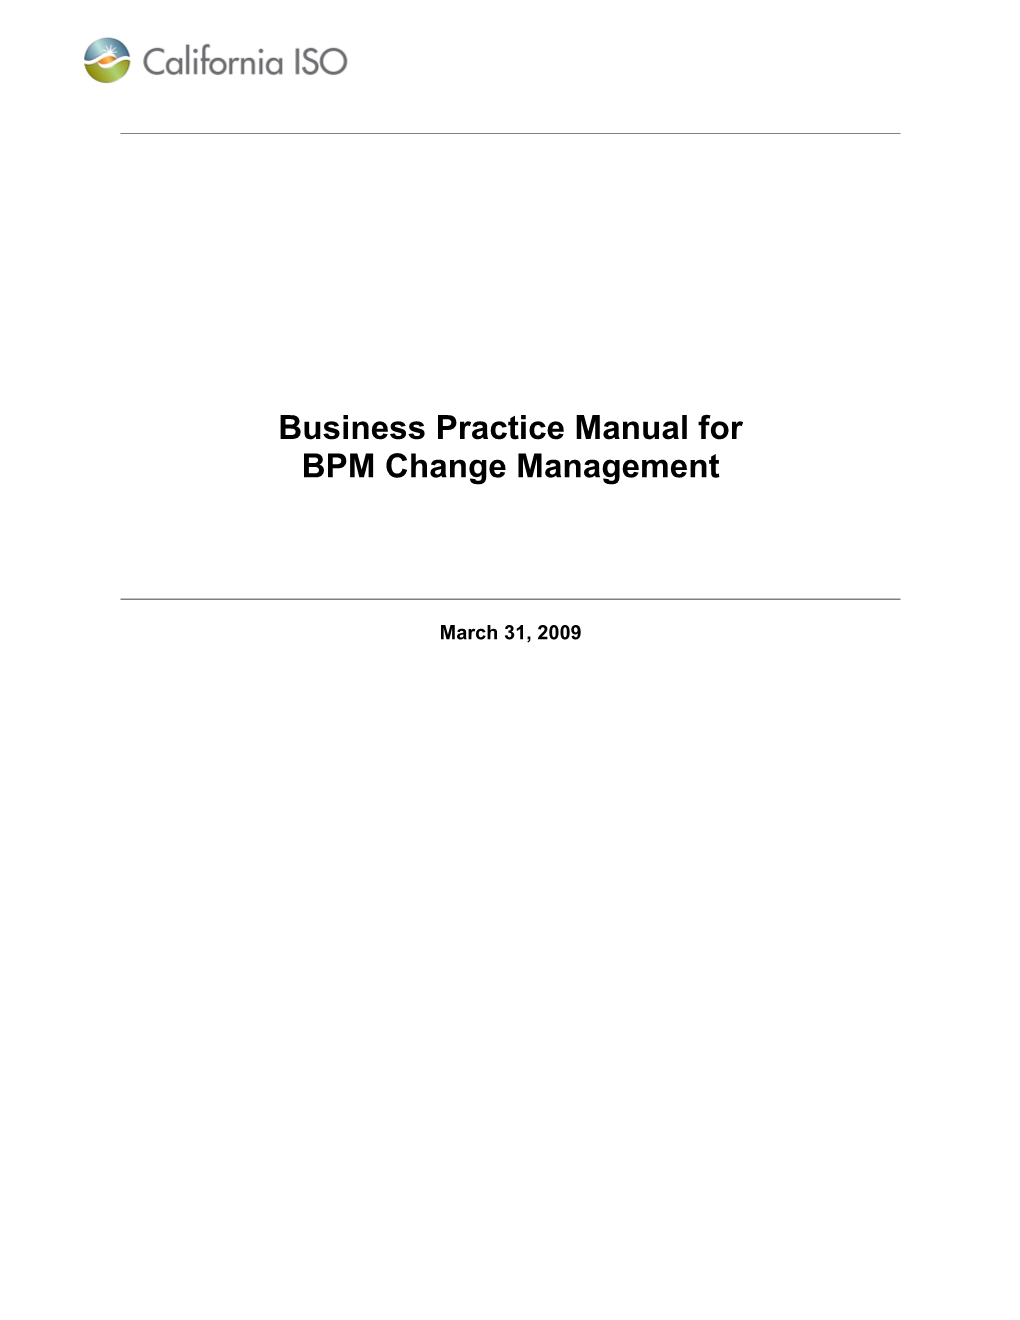 Business Practice Manualfor